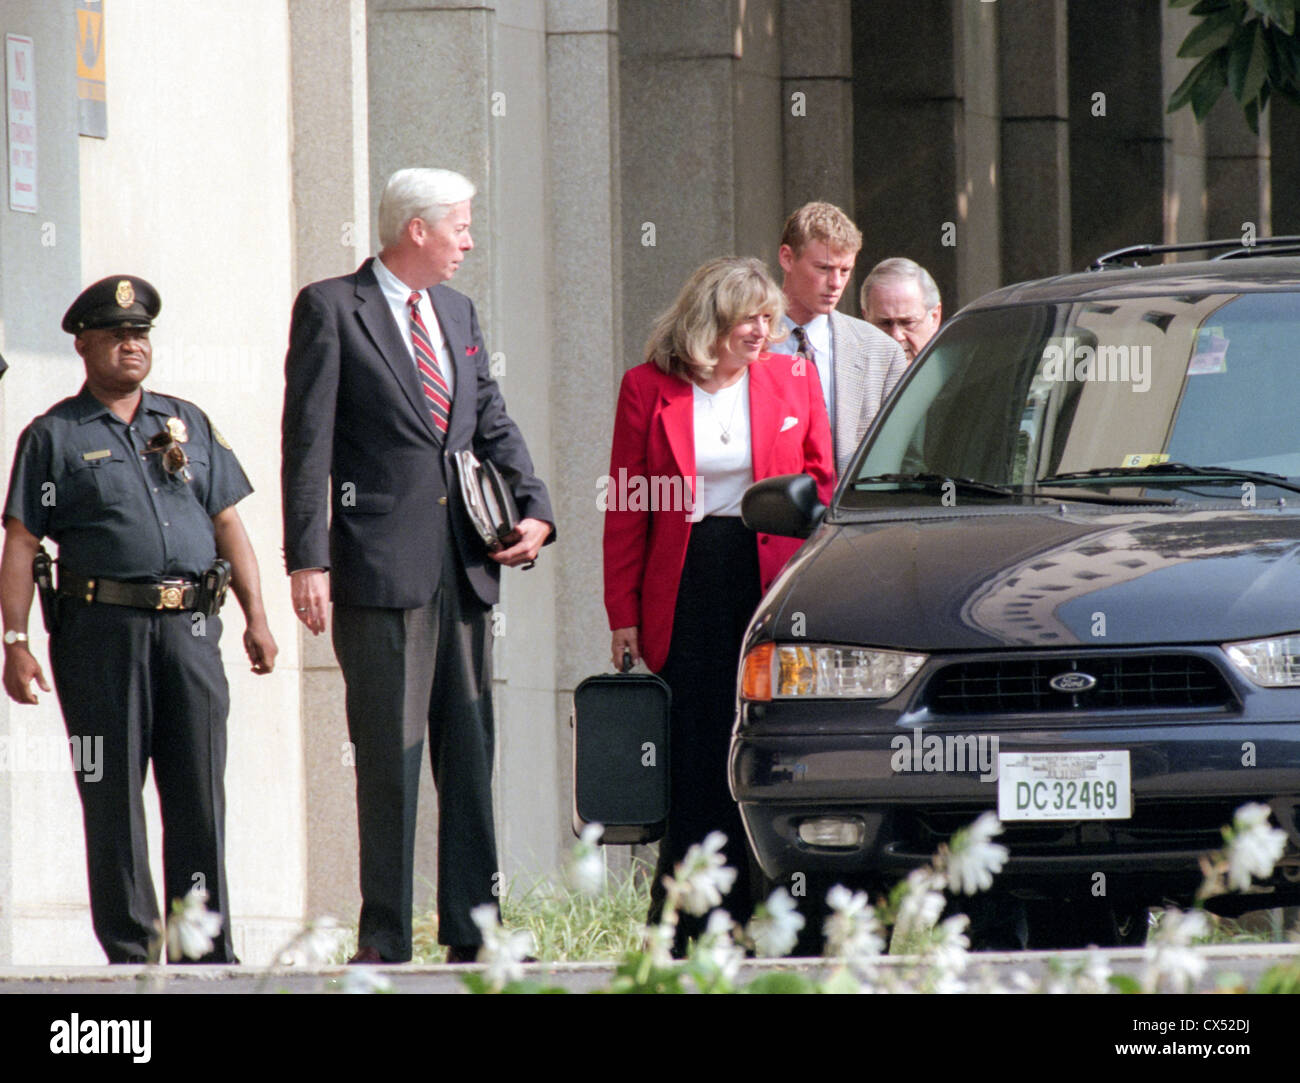 Star witness Linda Tripp enters the Federal Courthouse July 28, 1998 in Washington, DC. Tripp is testifying before Kenneth Starr's grand jury investigating an alleged presidential affair. Stock Photo